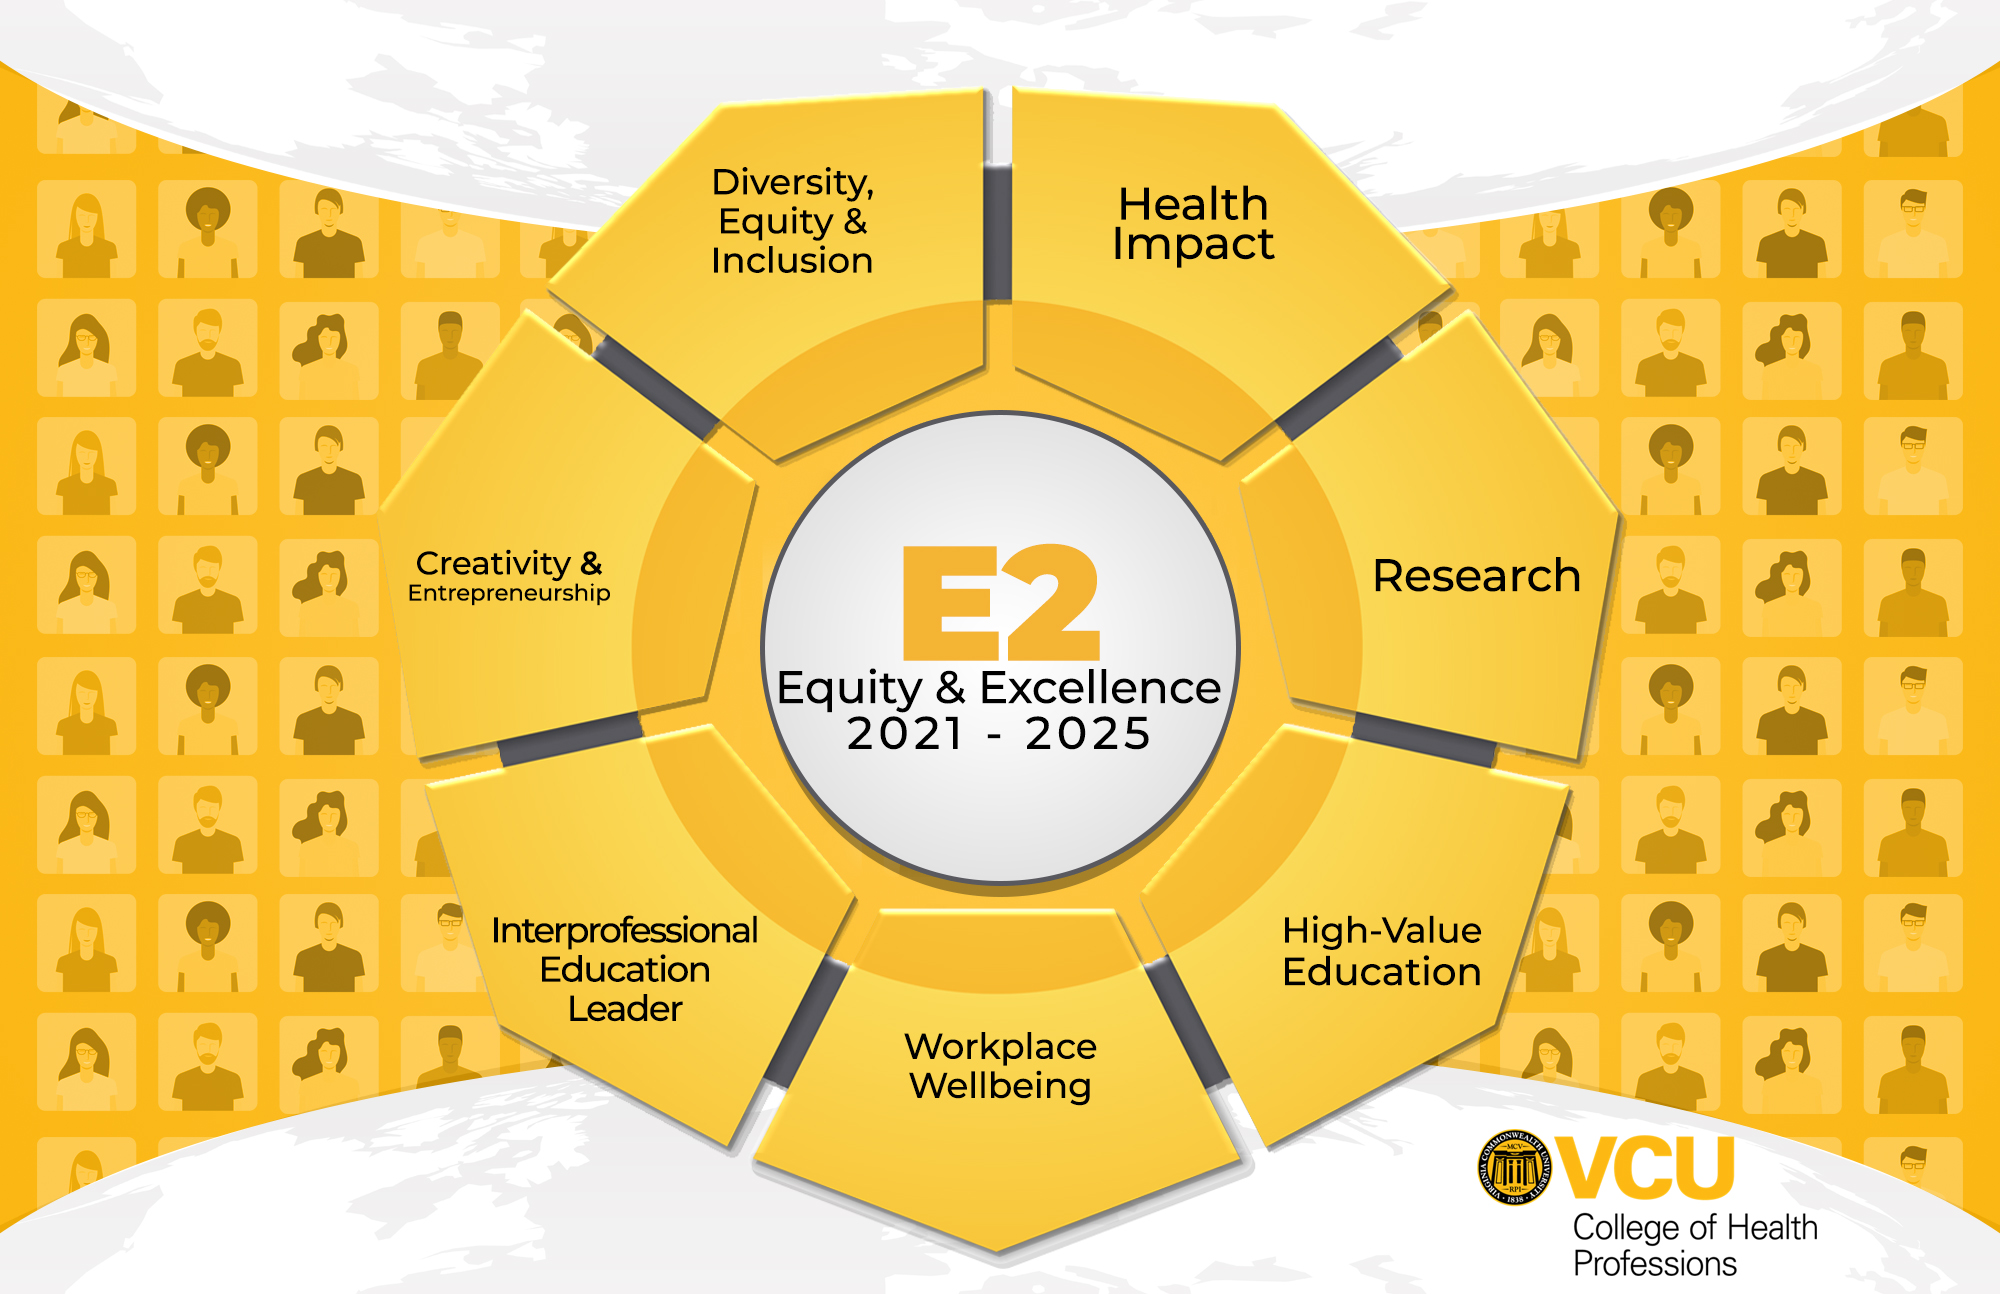 Equity and Excellence 2021-2021 - DEI, Health Impact, Research, High-Value Education, Workplace Wellbeing, Interprofessional Education Leader, Creativity & Entrepreneurship